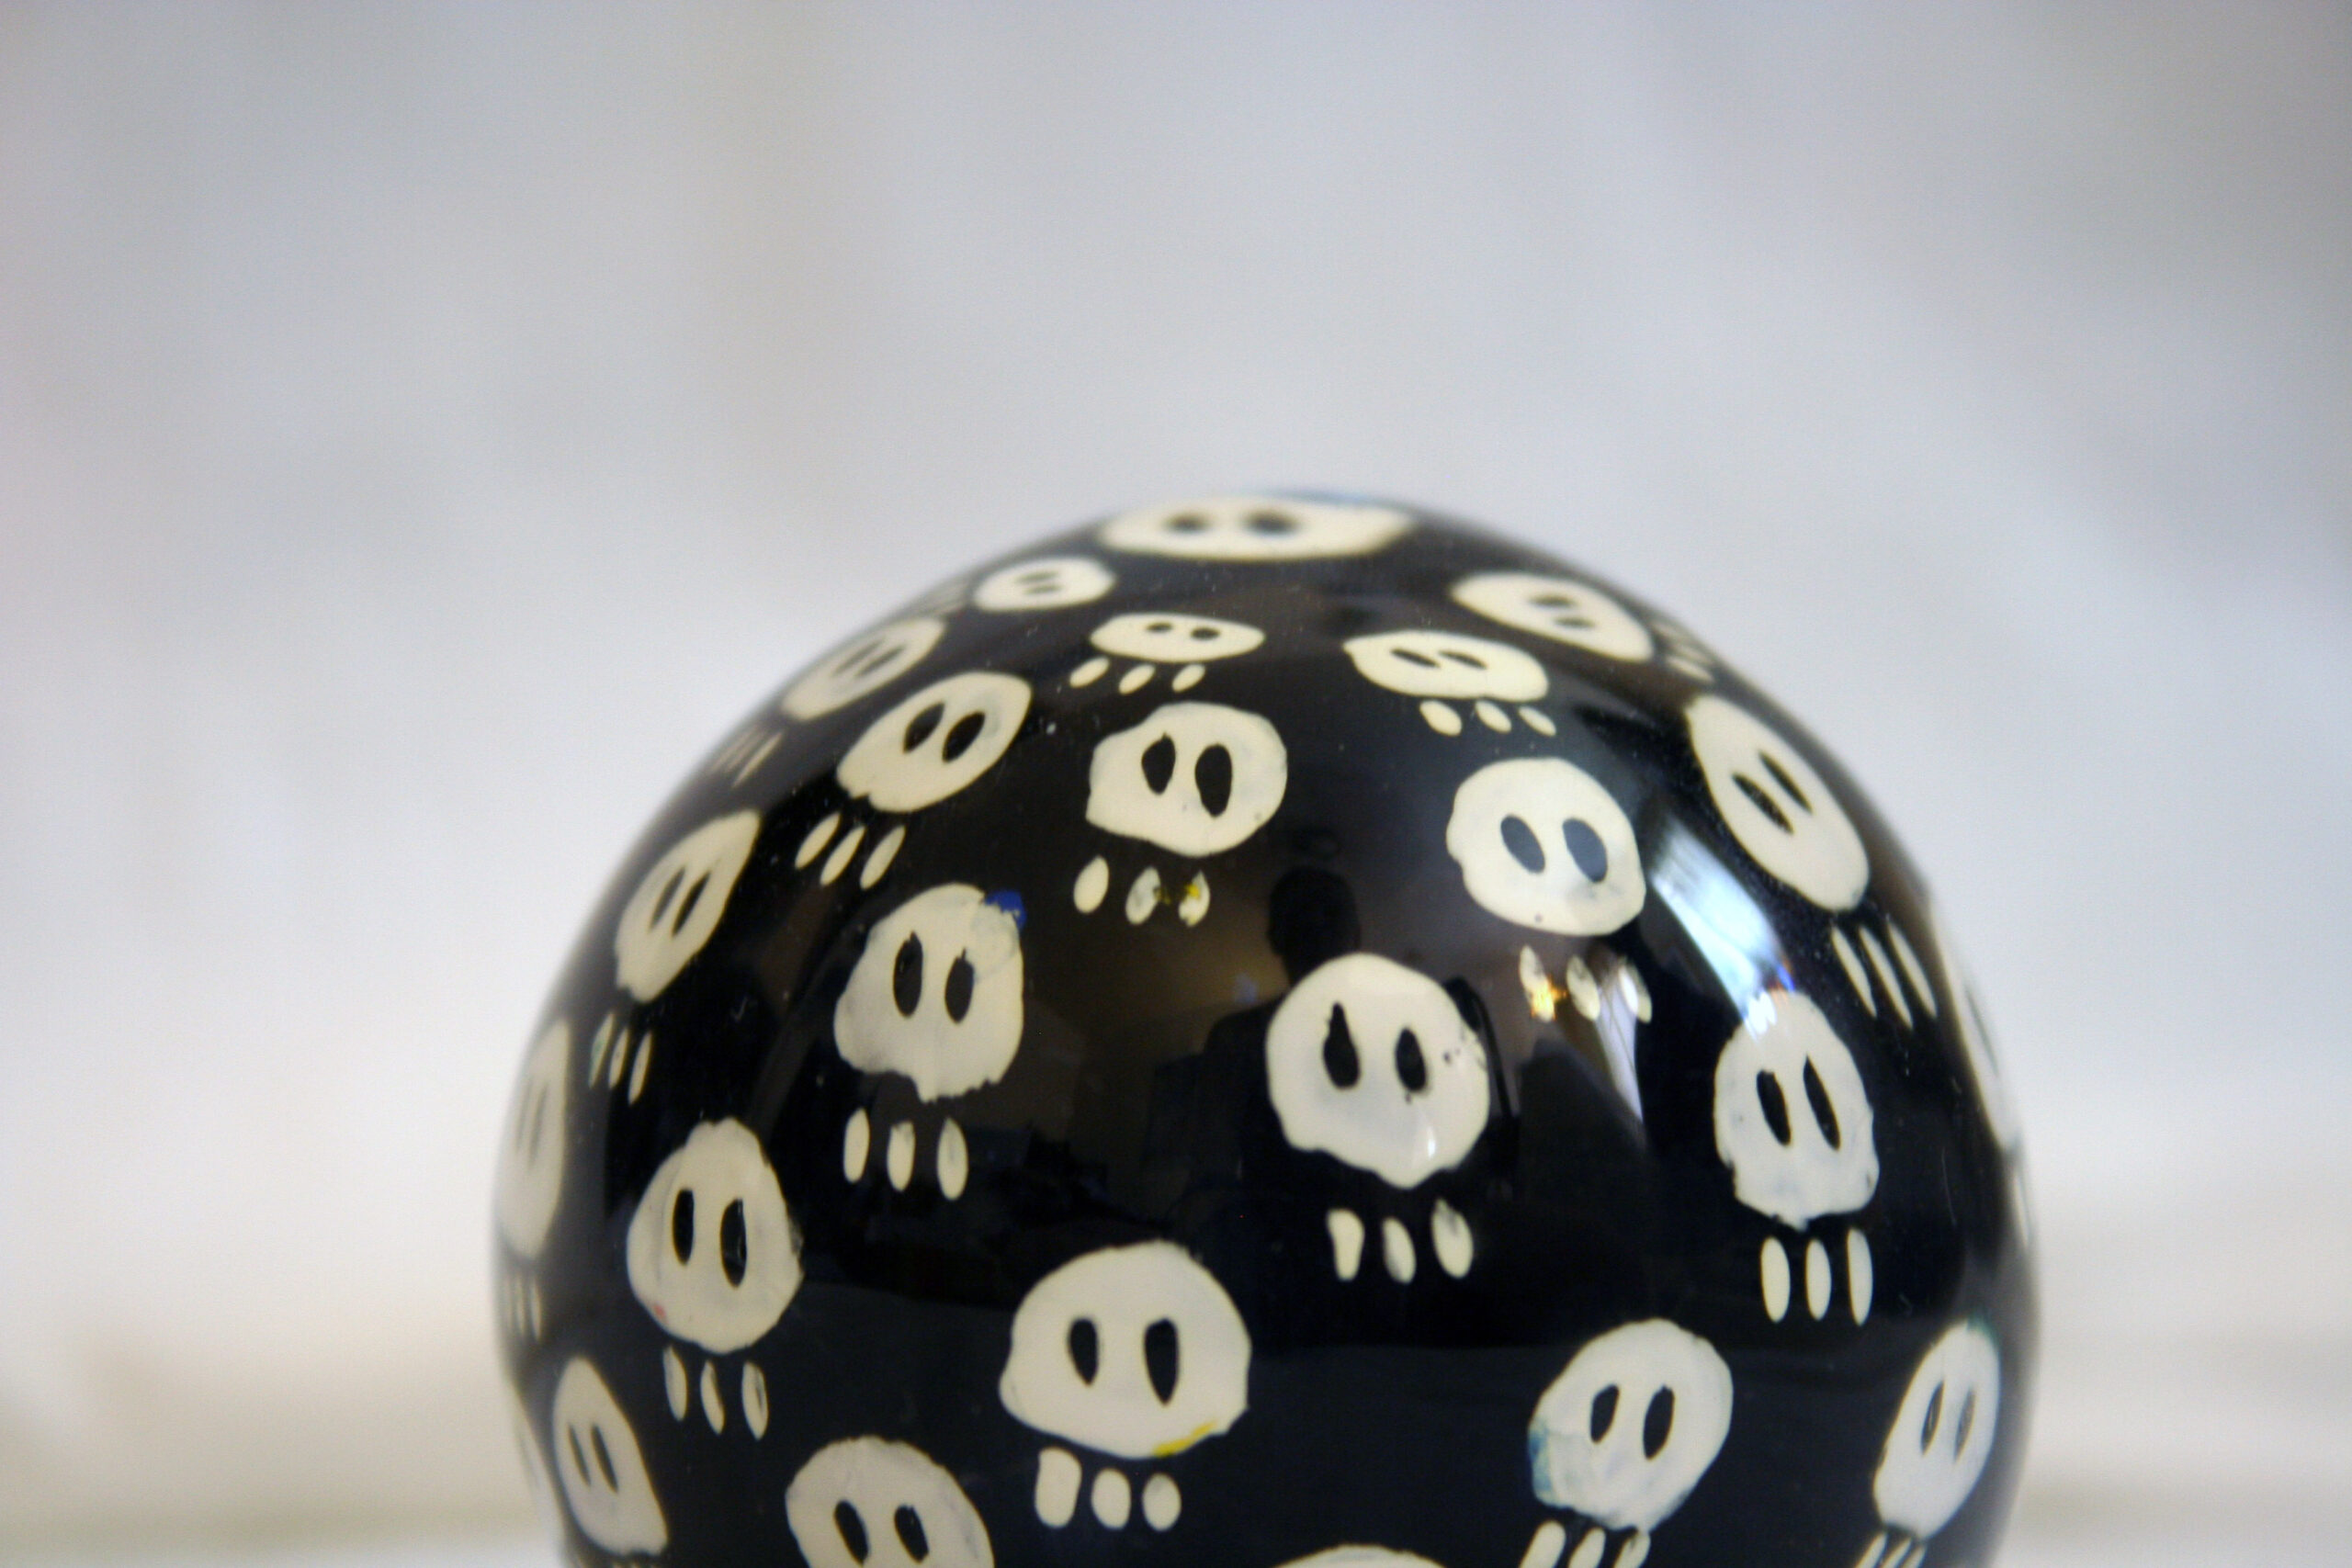 Blown Glass paperweight with hand painted cartoon skulls on it